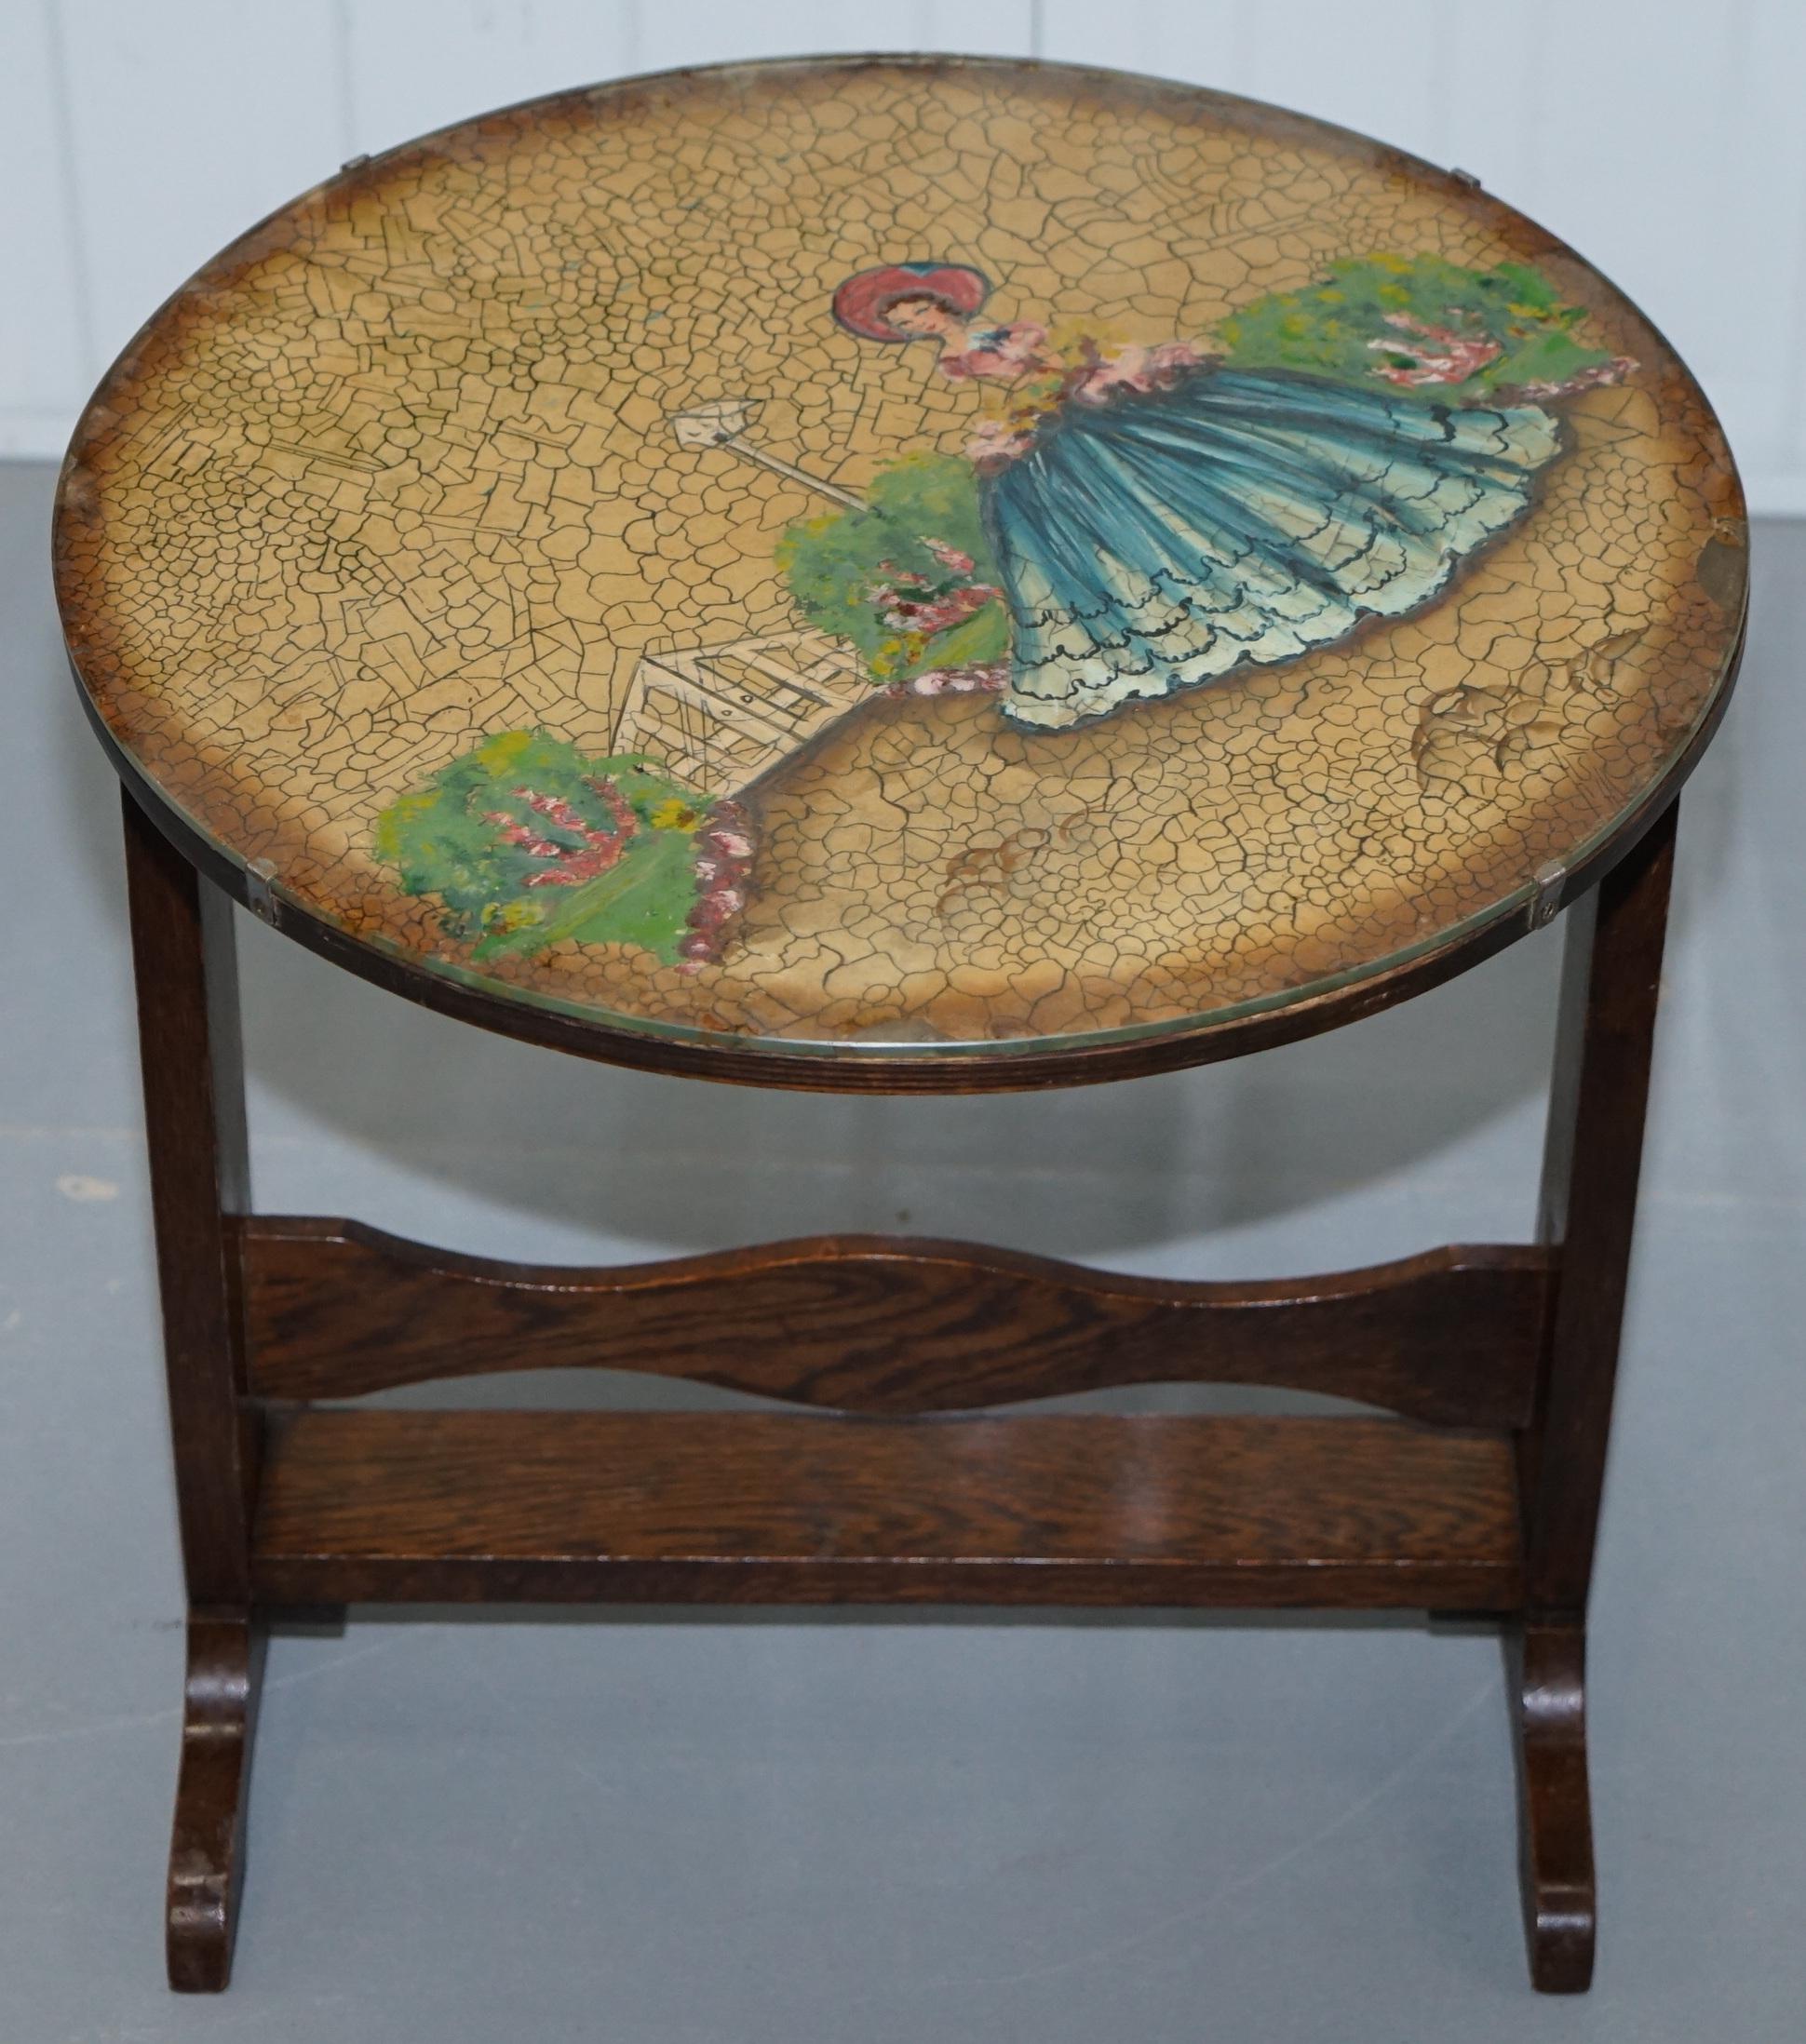 We are delighted to offer for sale this lovely little handmade in England tilt top oak side table with glass cased hand painted picture

A good looking and well-made piece, the pictures have been refitted at the wrong angle which can be realigned